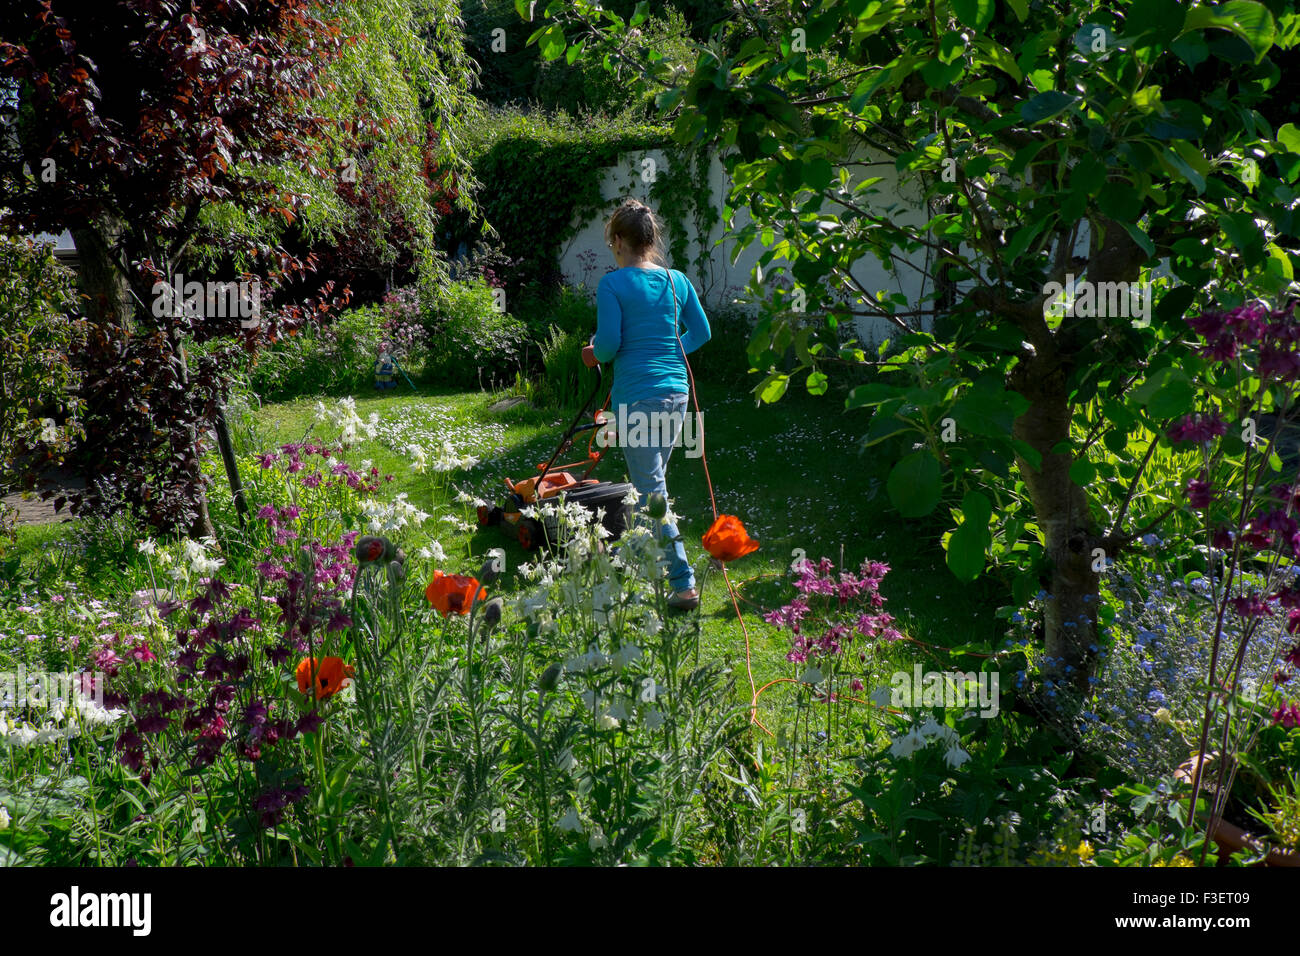 Elderly woman mowing lawn with electric mower, Wales, UK Stock Photo